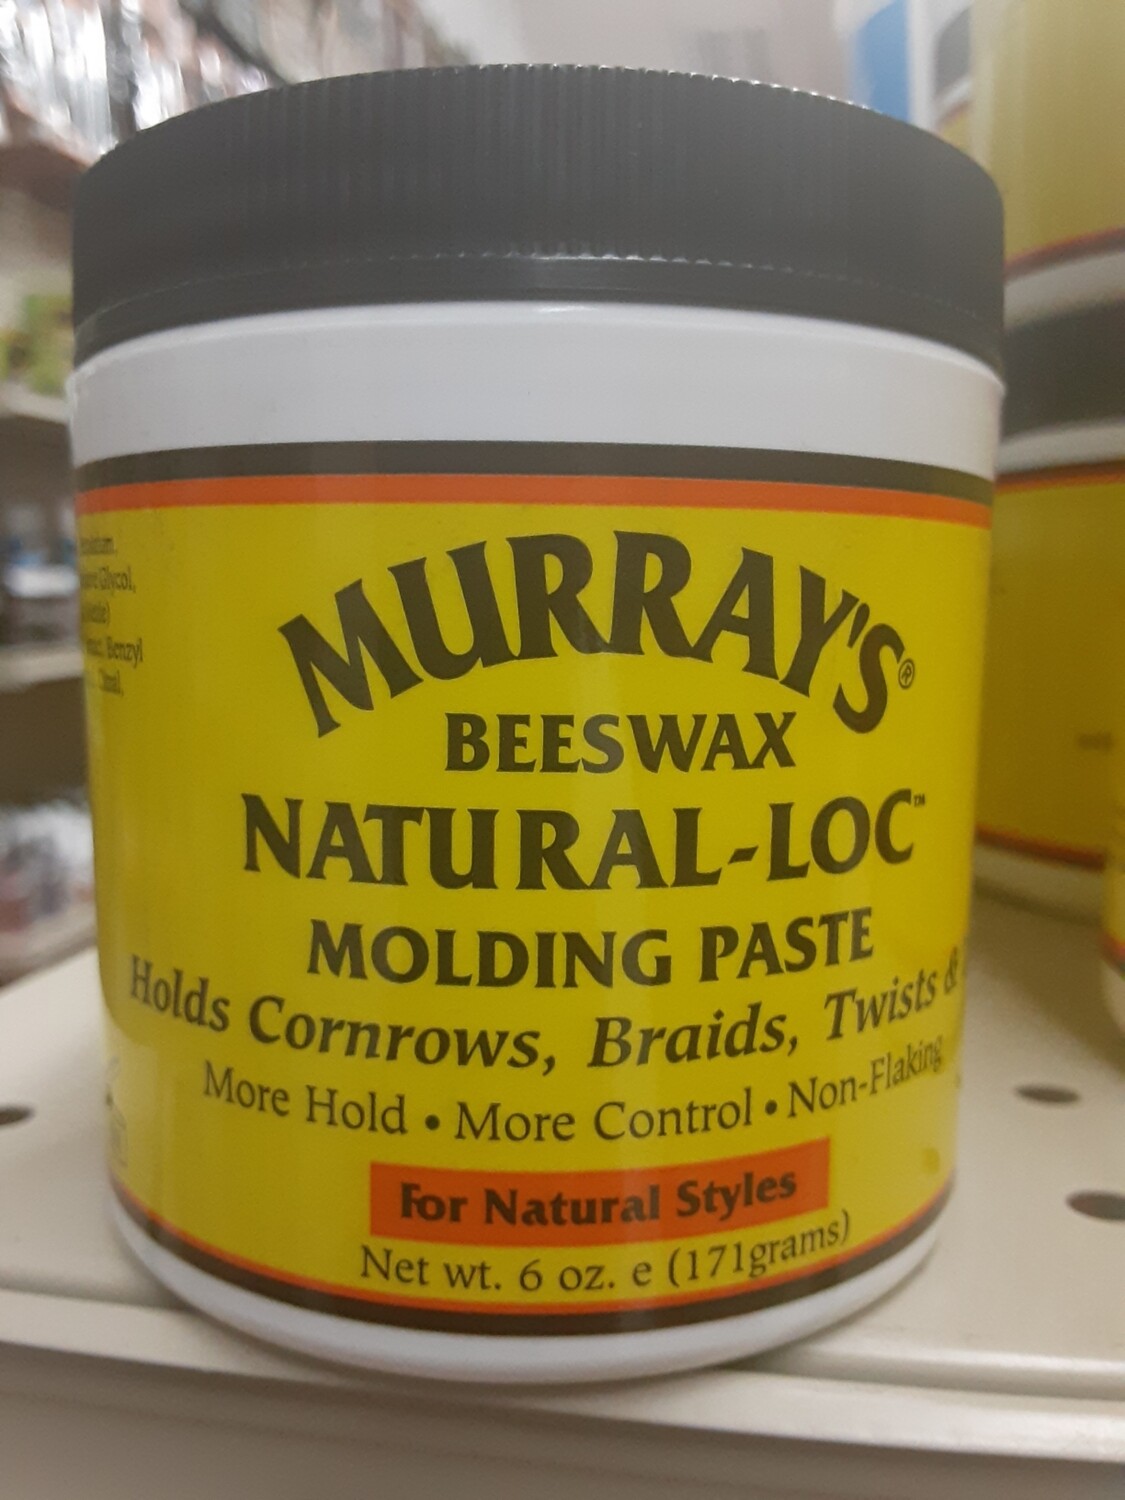 Murray's beeswax natural loc molding paste